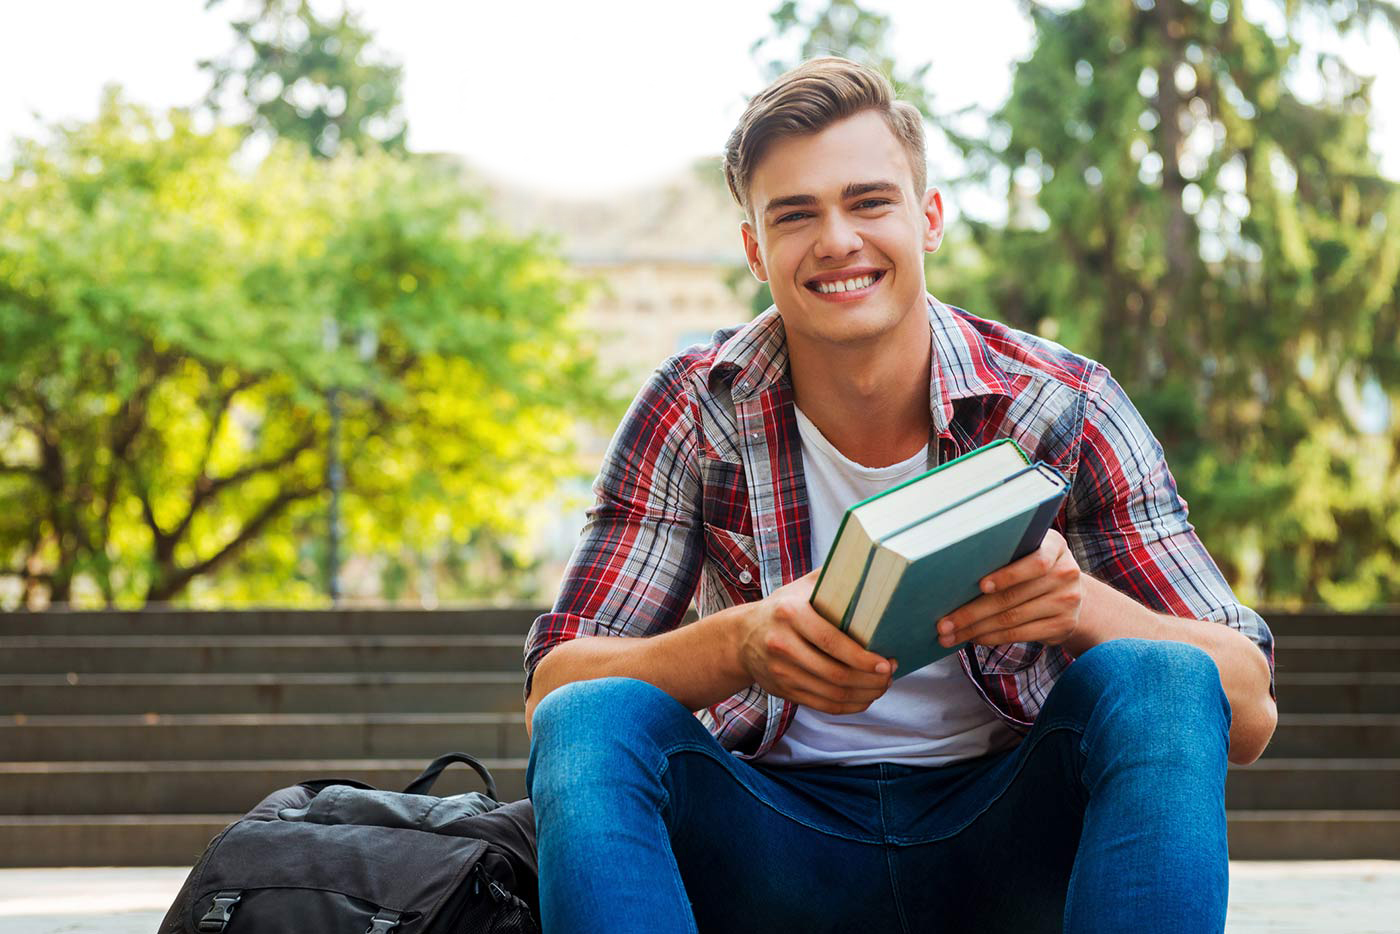 Image of student sitting on bench with books in his hand smiling at camera.